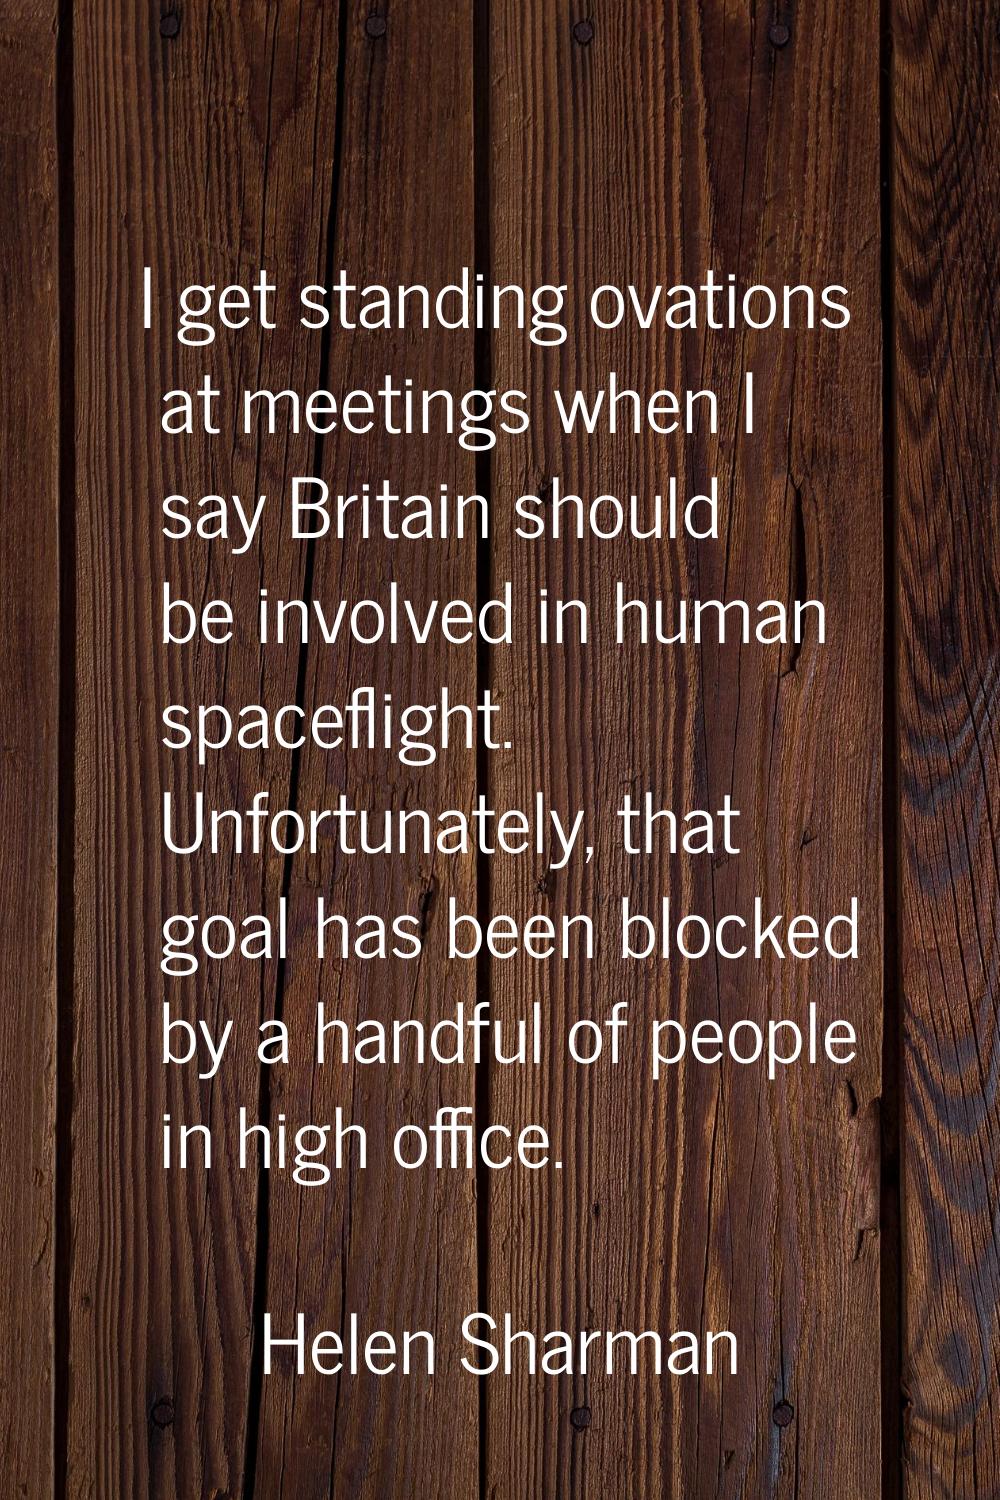 I get standing ovations at meetings when I say Britain should be involved in human spaceflight. Unf